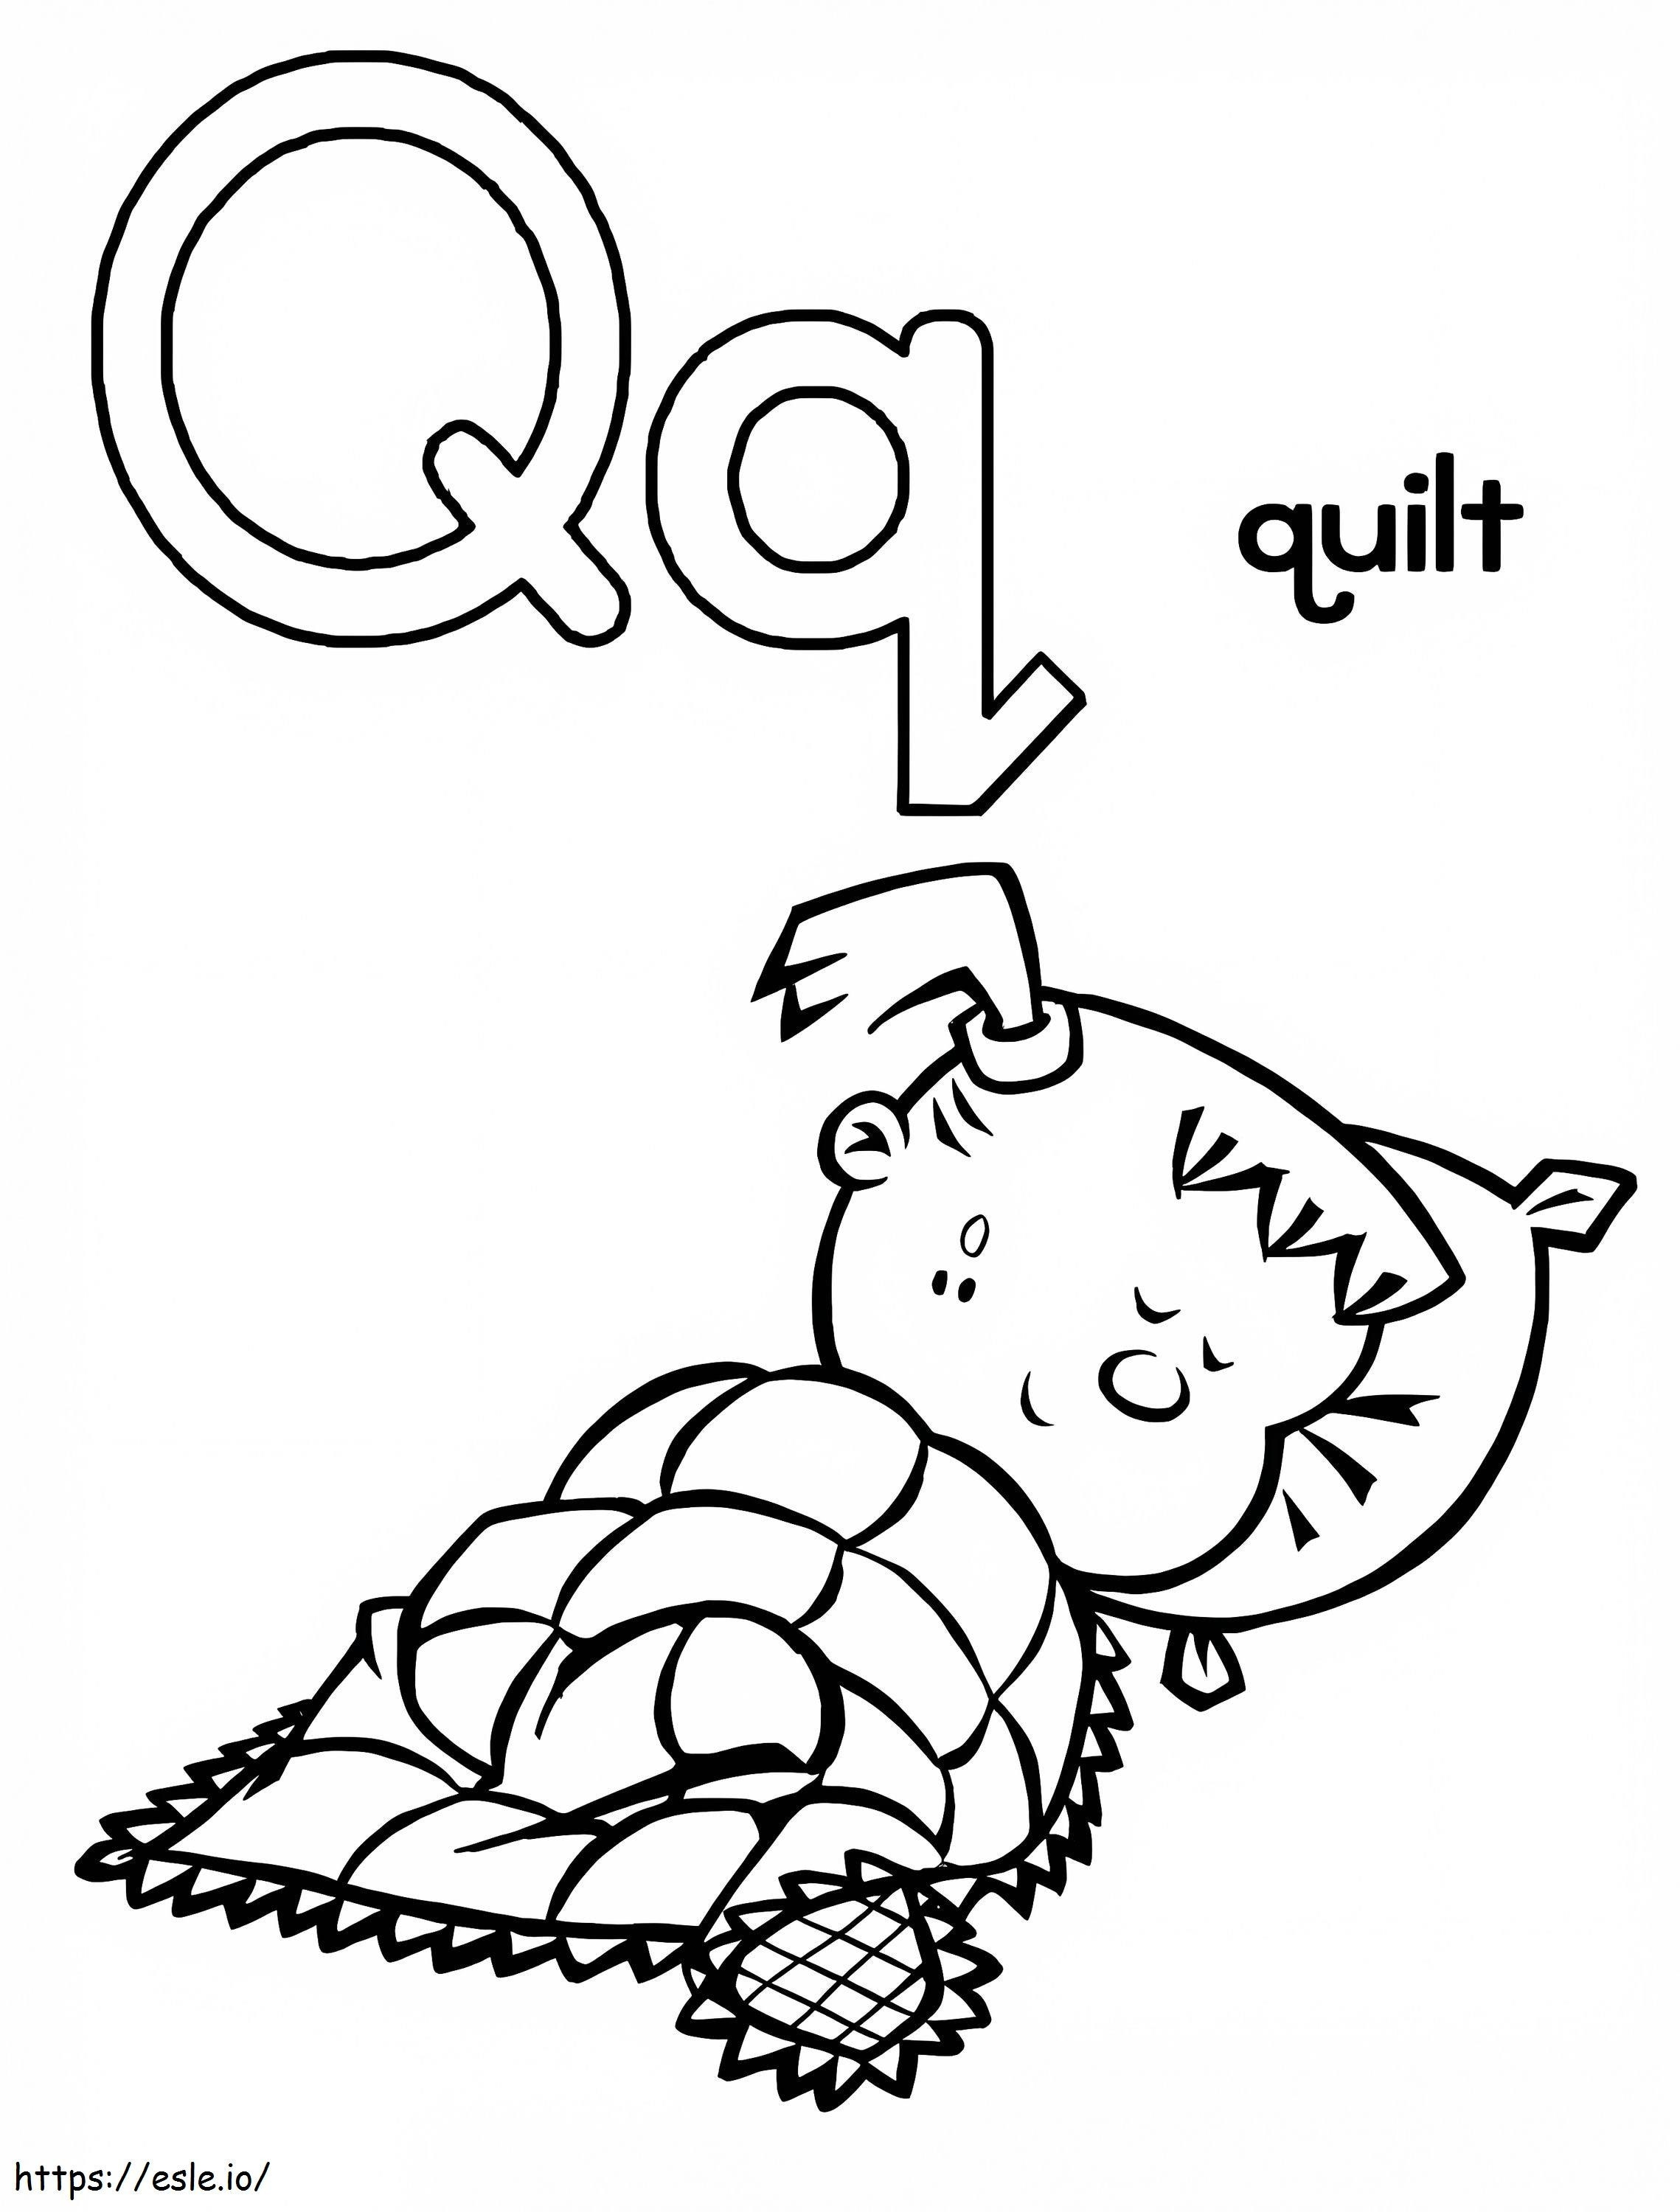 Quilt 4 coloring page